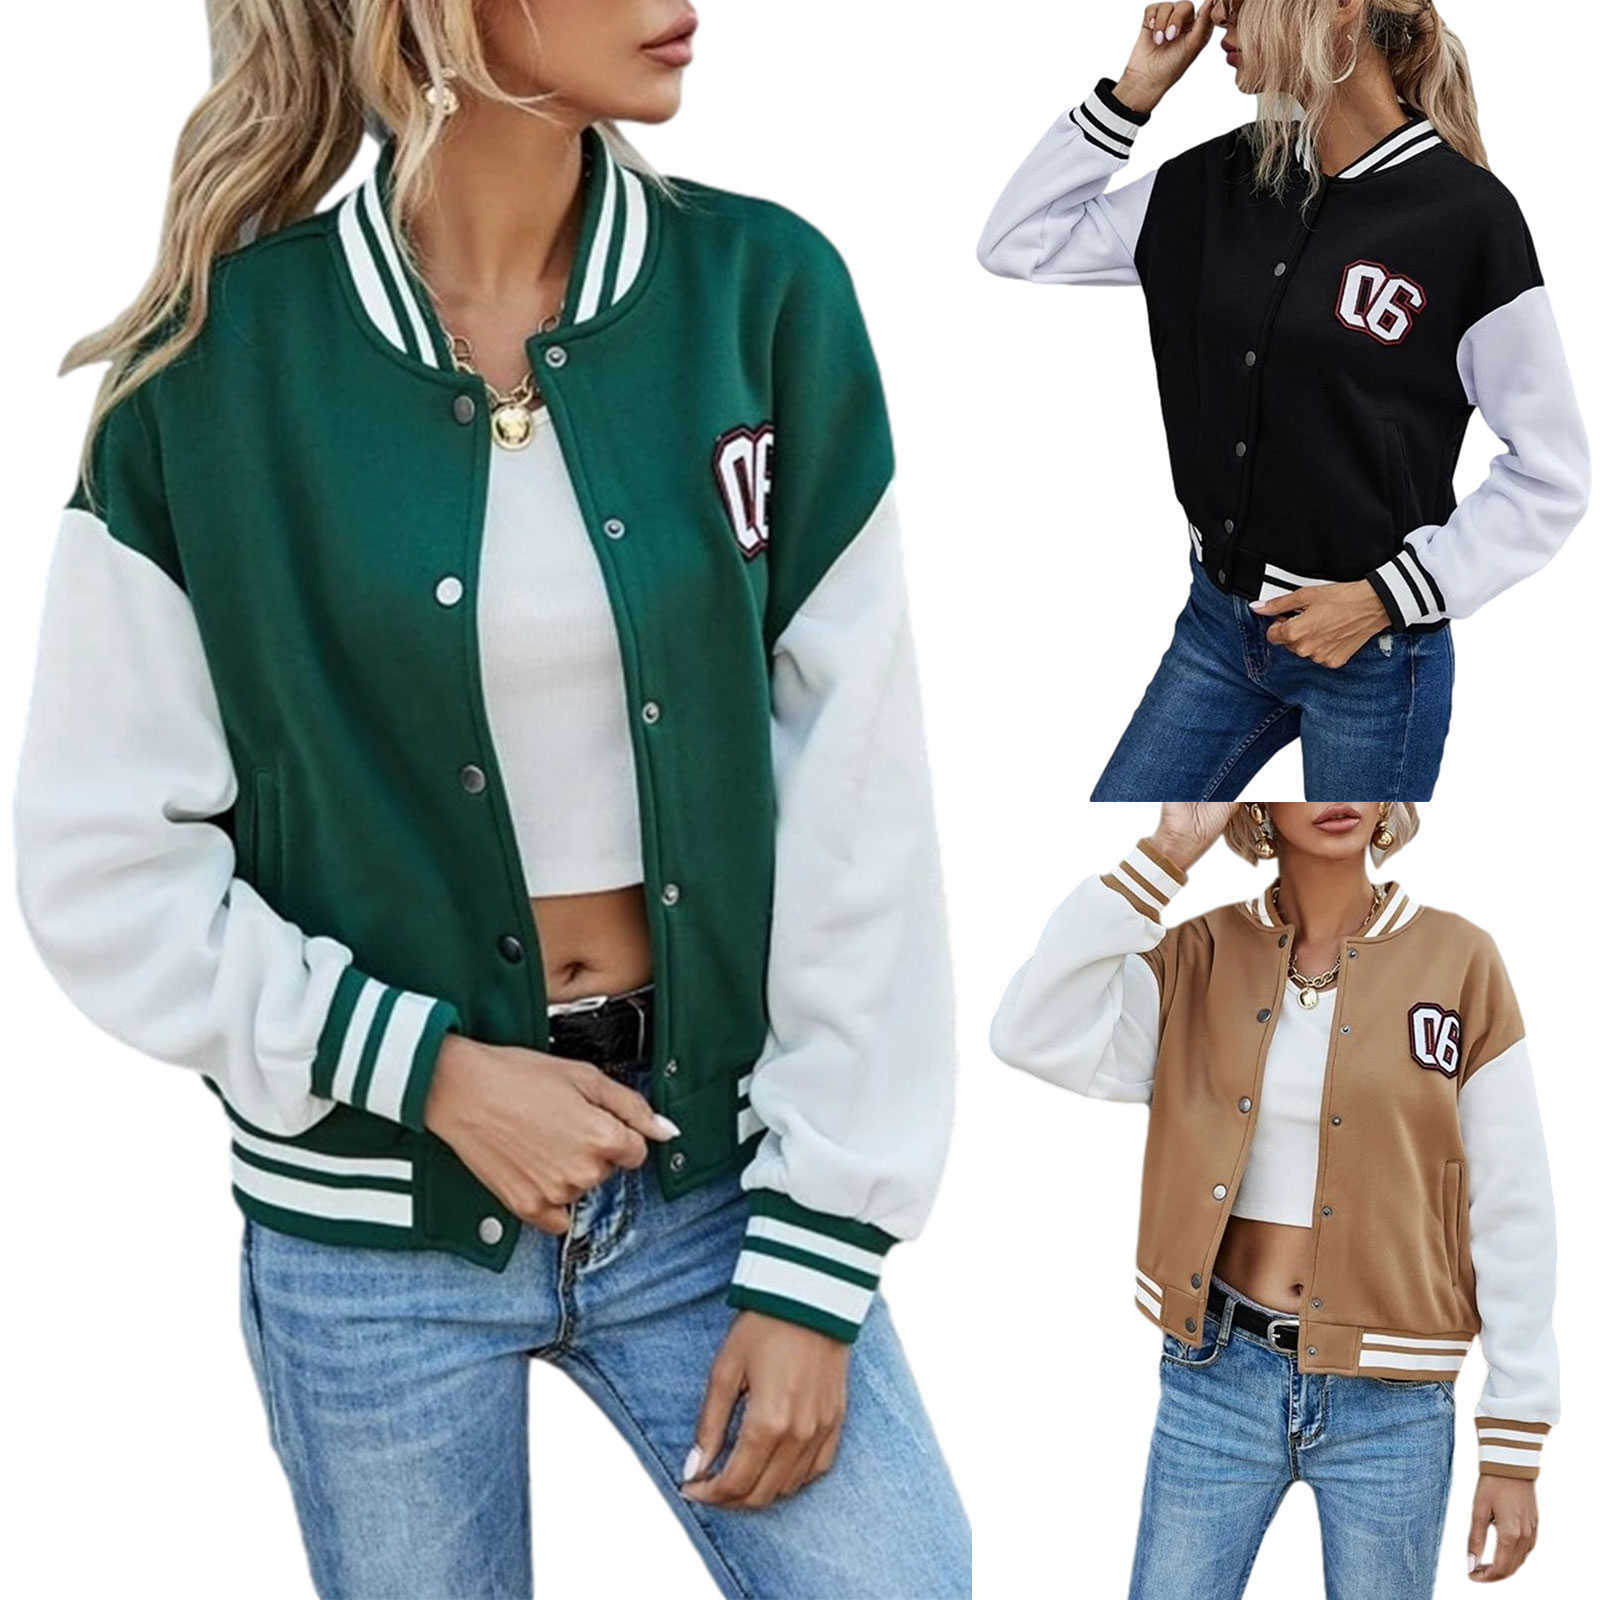 

Women' Jackets Number Patched Color Block Bomber Jacket Girls Long Sleeve Autumn Lady Matching Stand Collar Baseball Tops Single-breasted Coat T221008, Green